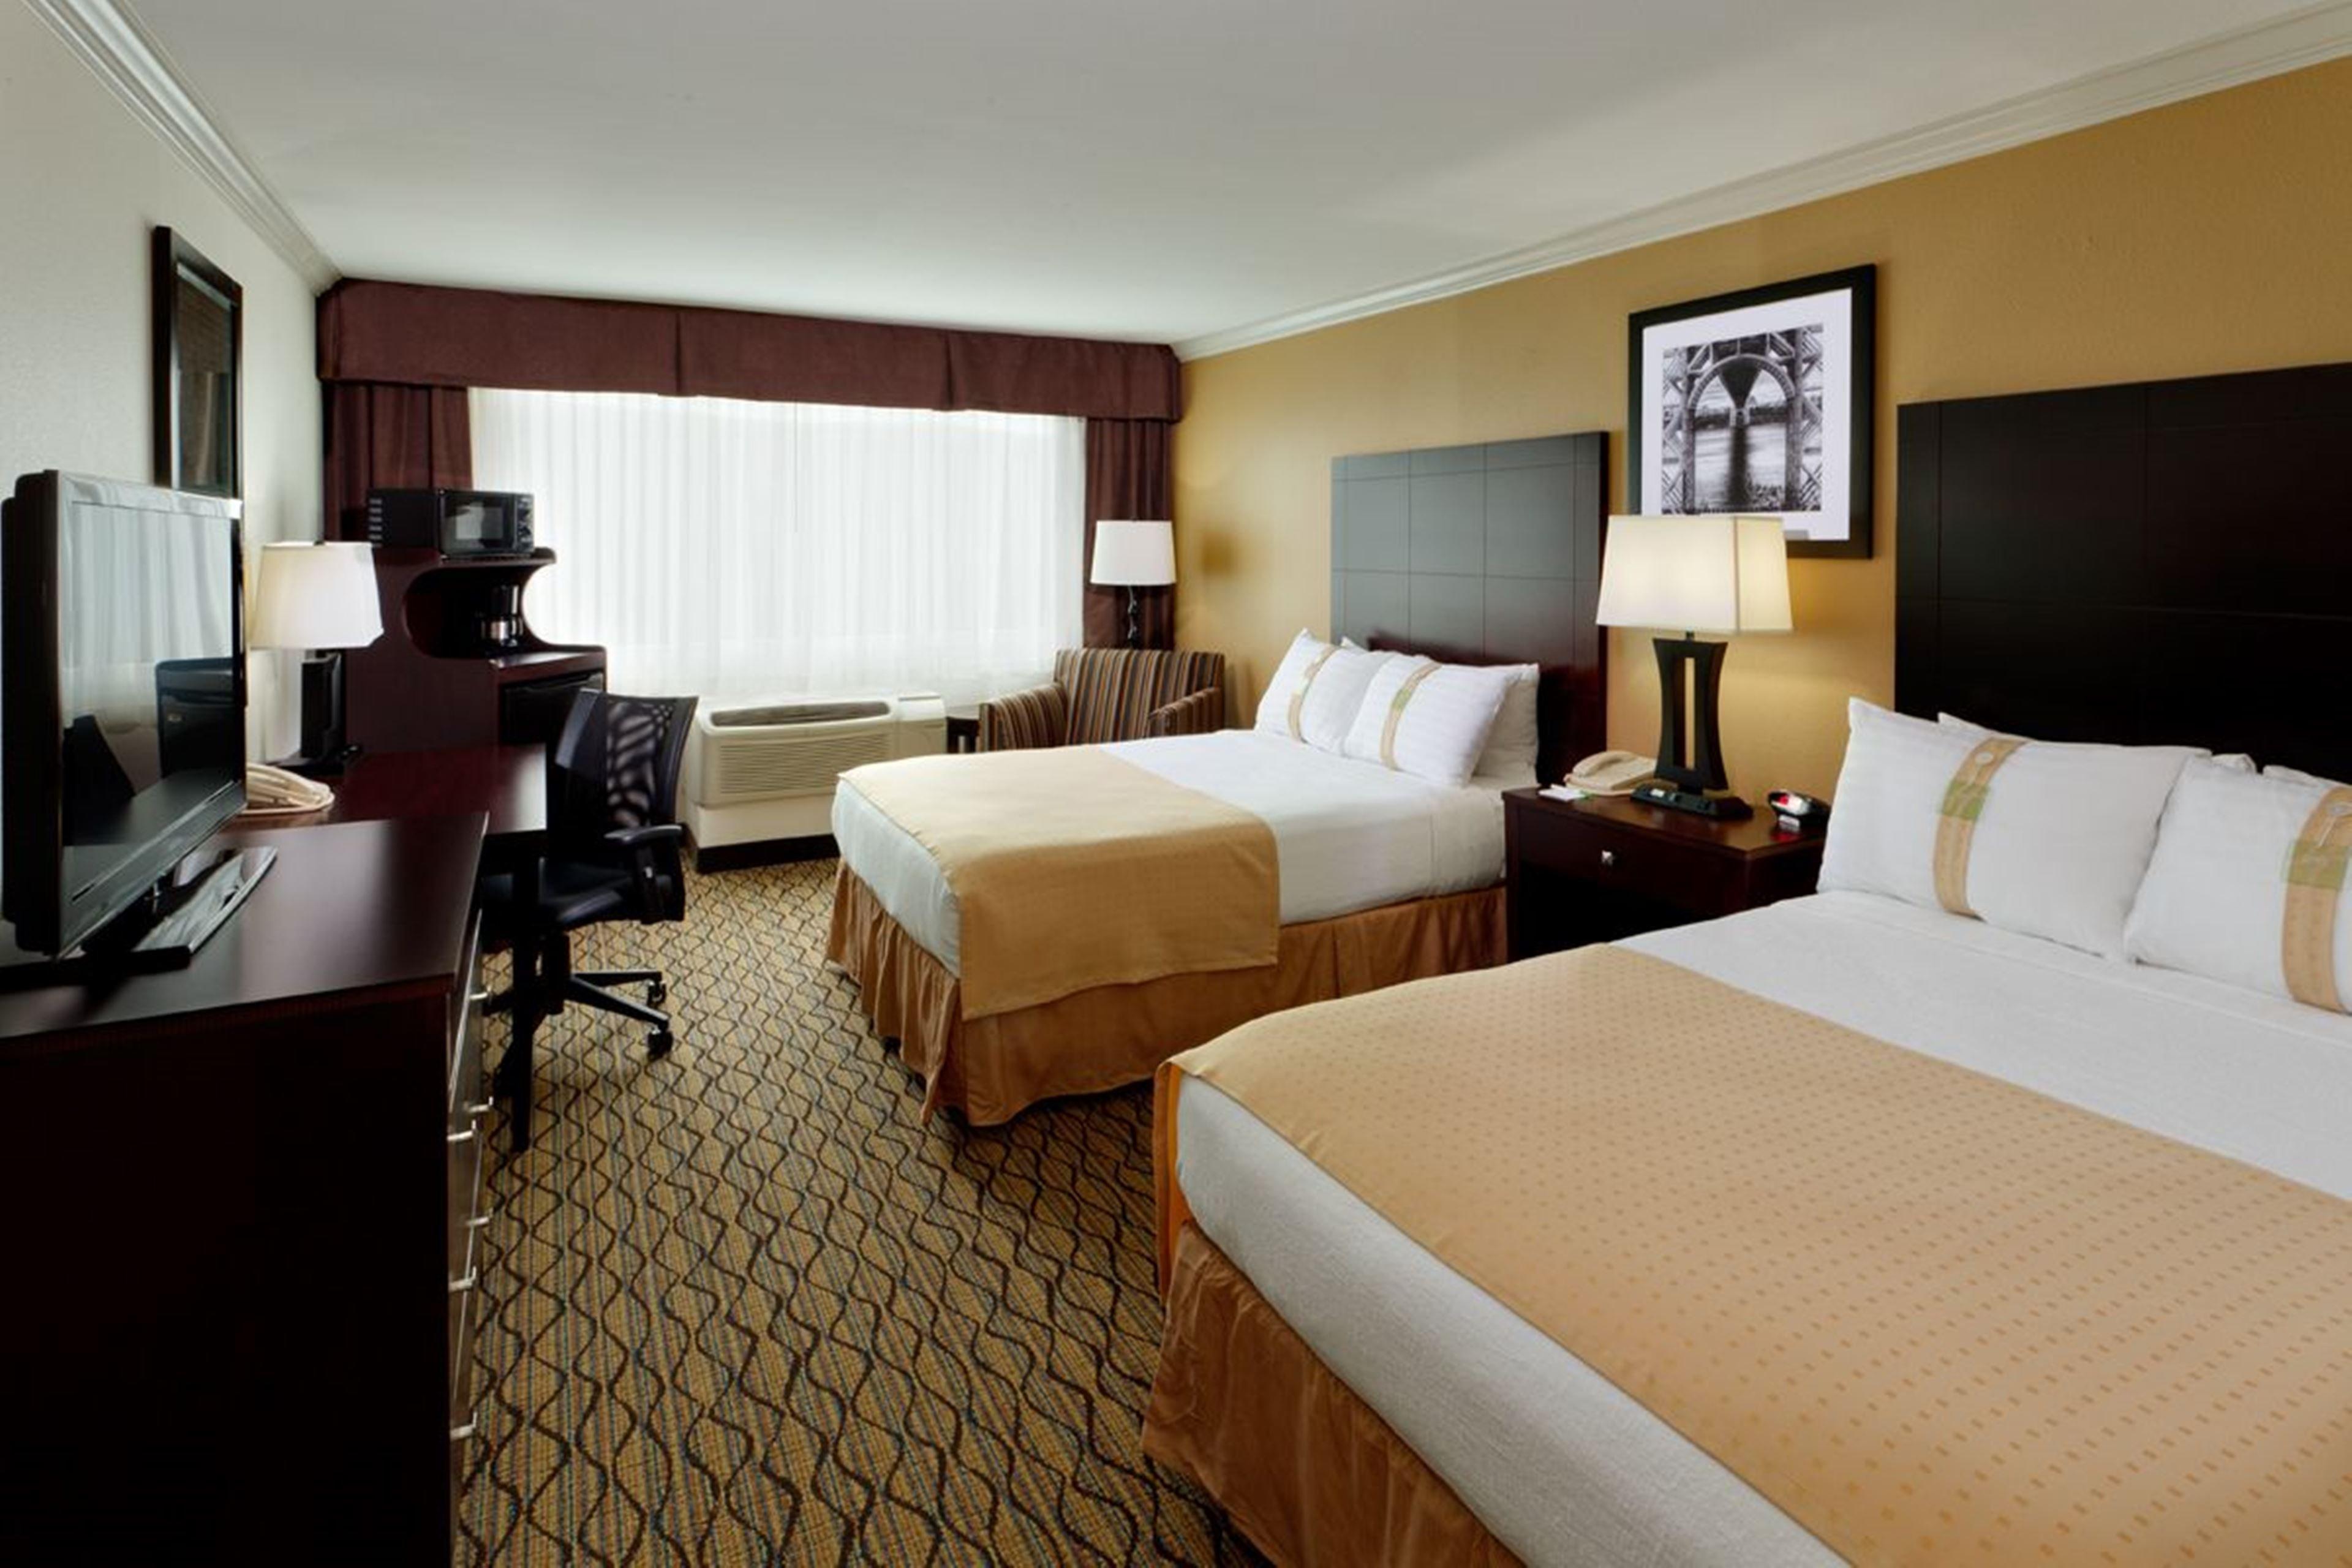 HOTEL HOLIDAY INN FORT LEE, NJ 3* (United States) - from US$ 164 | BOOKED